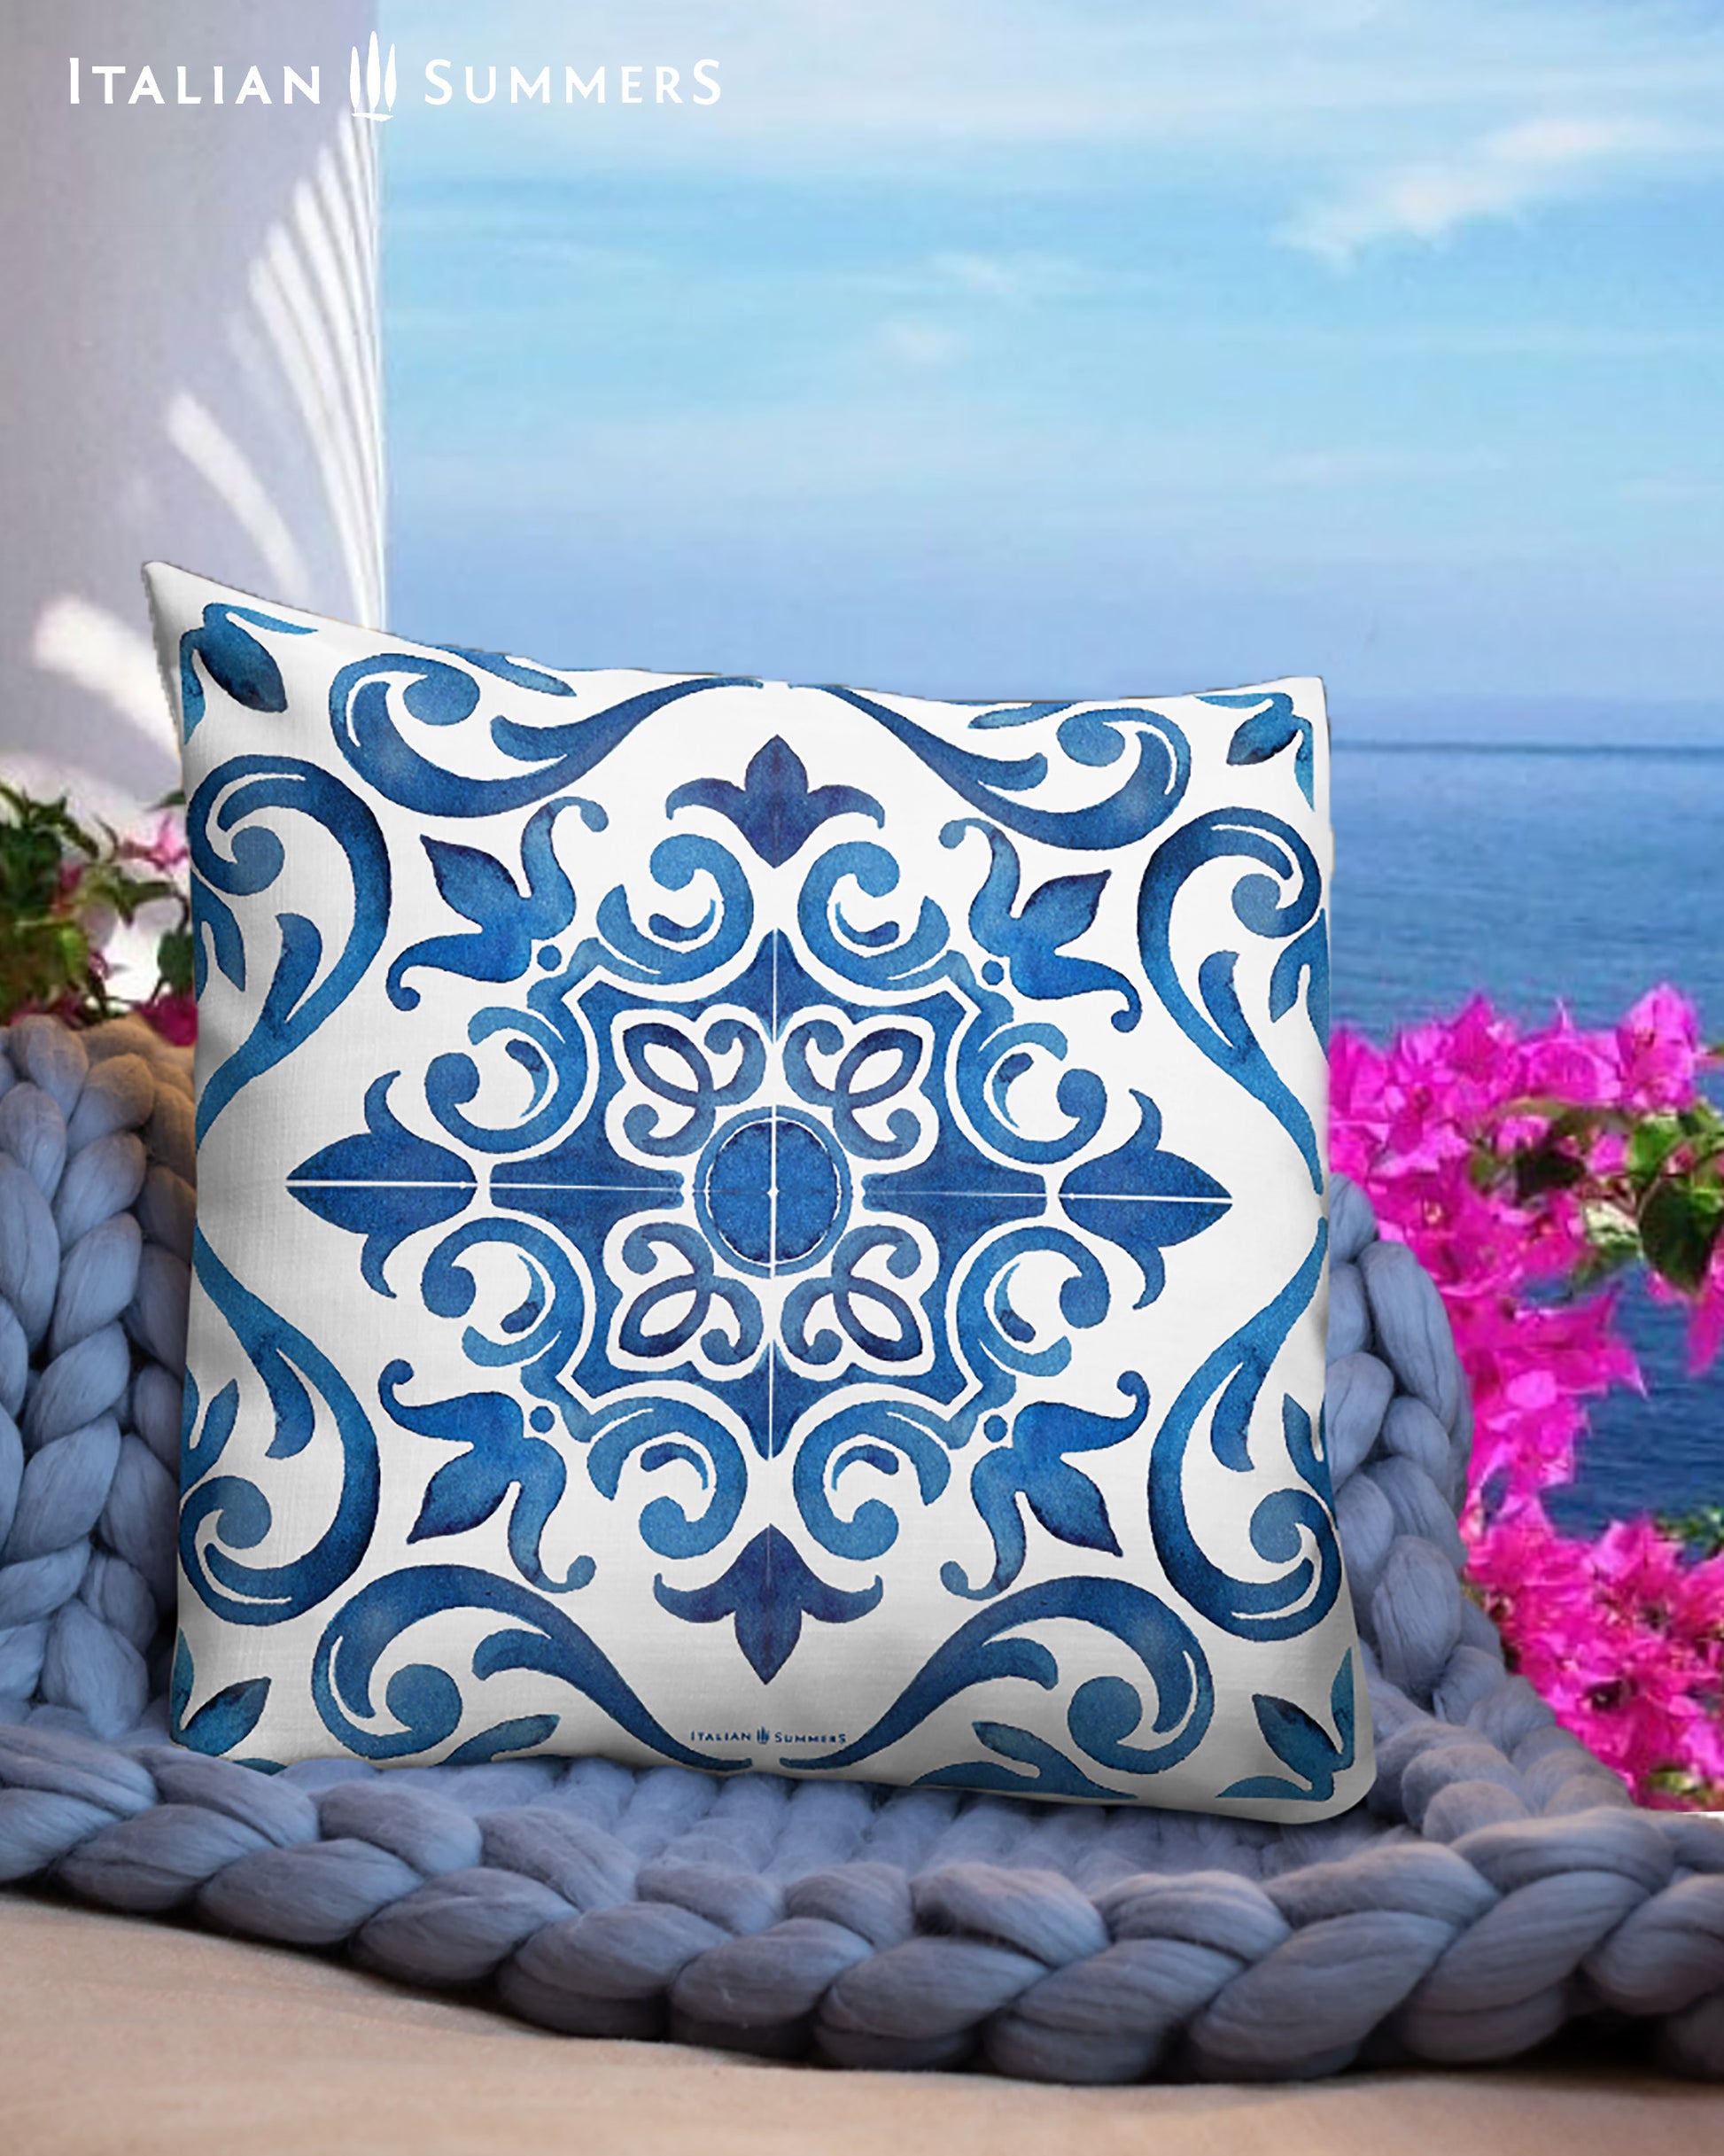 This Italy-inspired pillow features a beautiful blue and white maiolica tile that looks like it was plucked straight from the Amalfi Coast.